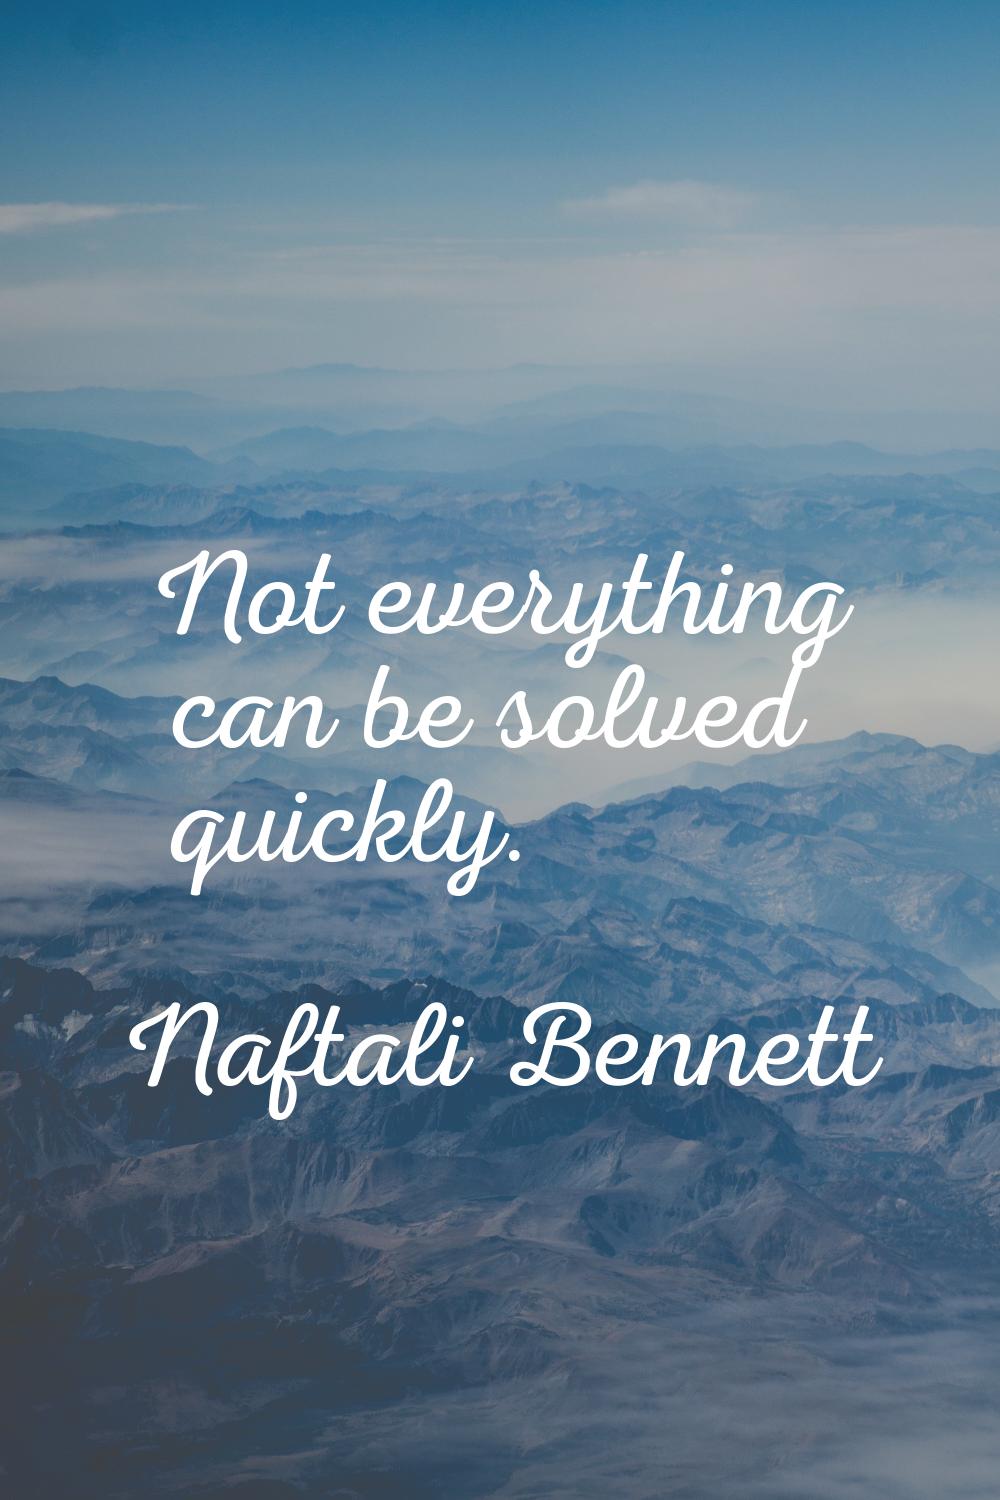 Not everything can be solved quickly.